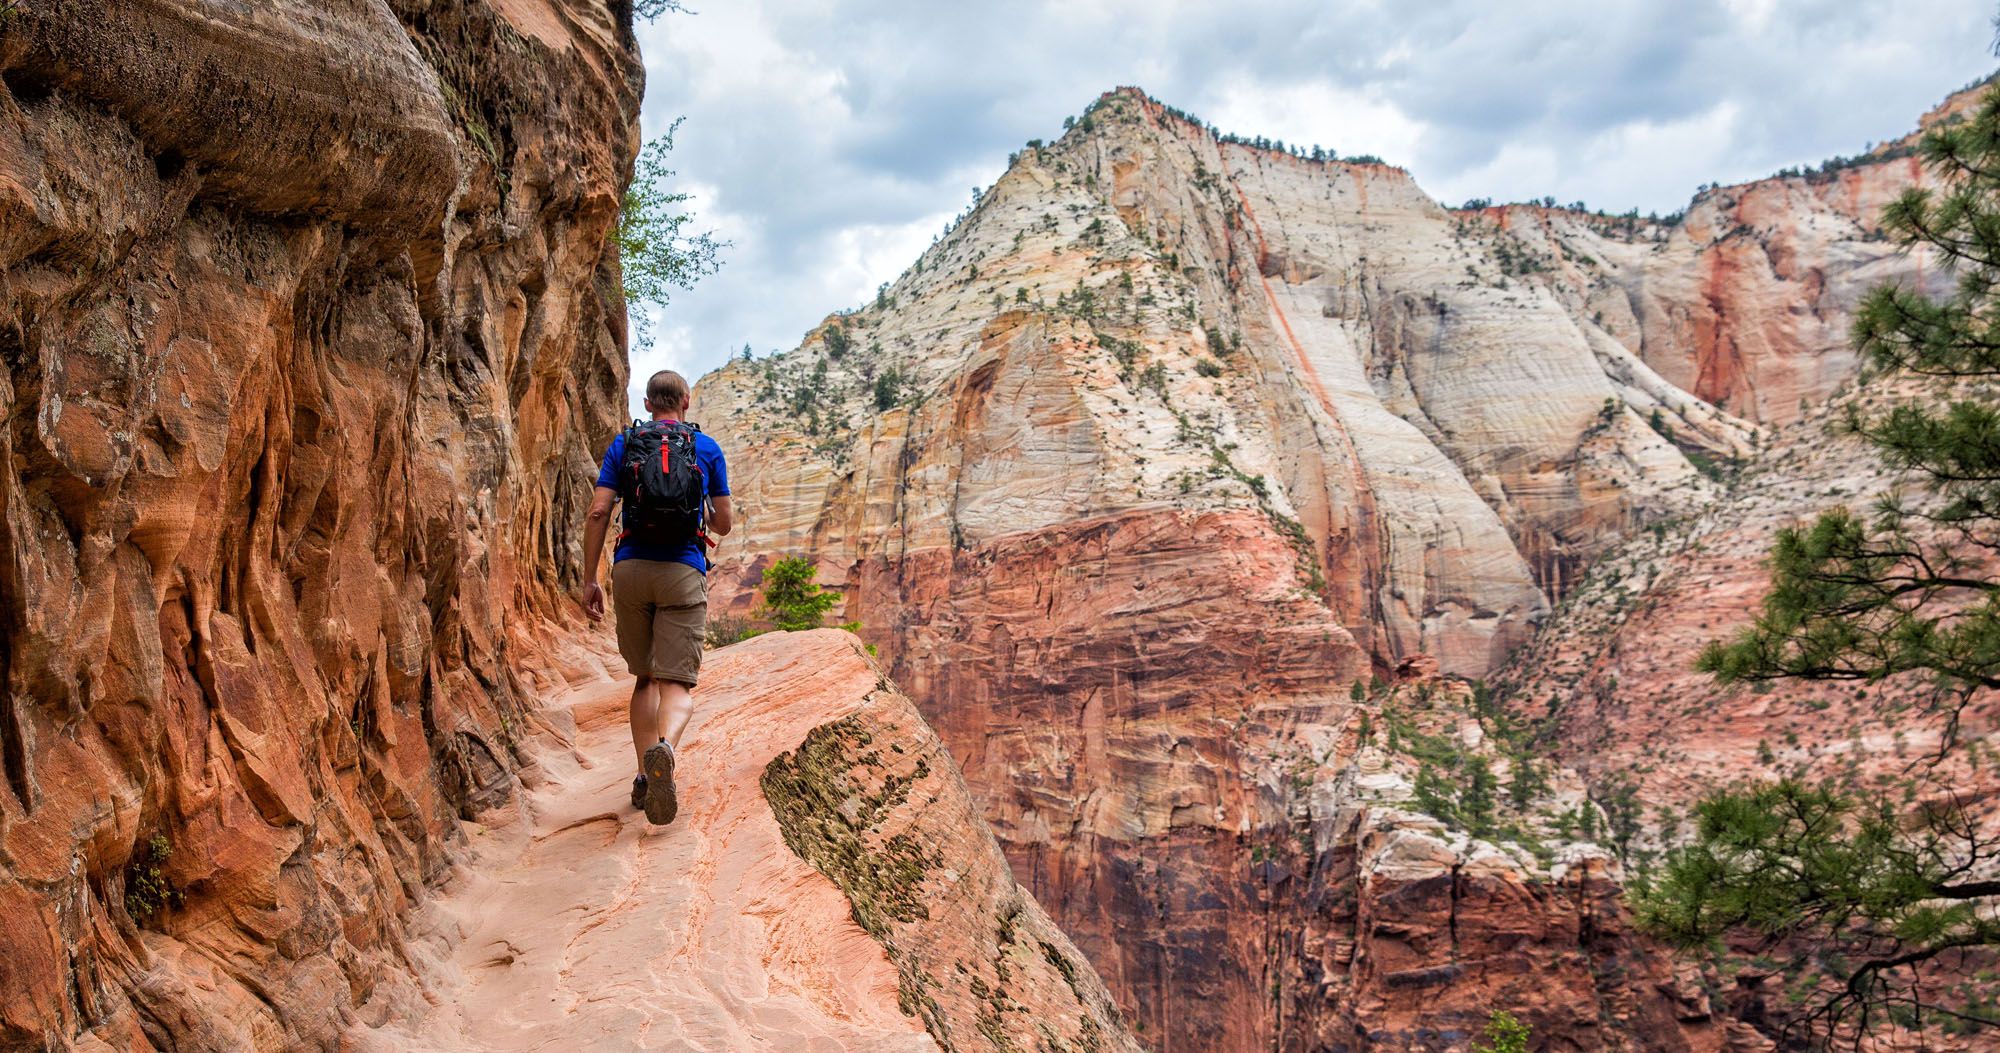 Featured image for “Hidden Canyon: An Unexpected Surprise in Zion National Park”